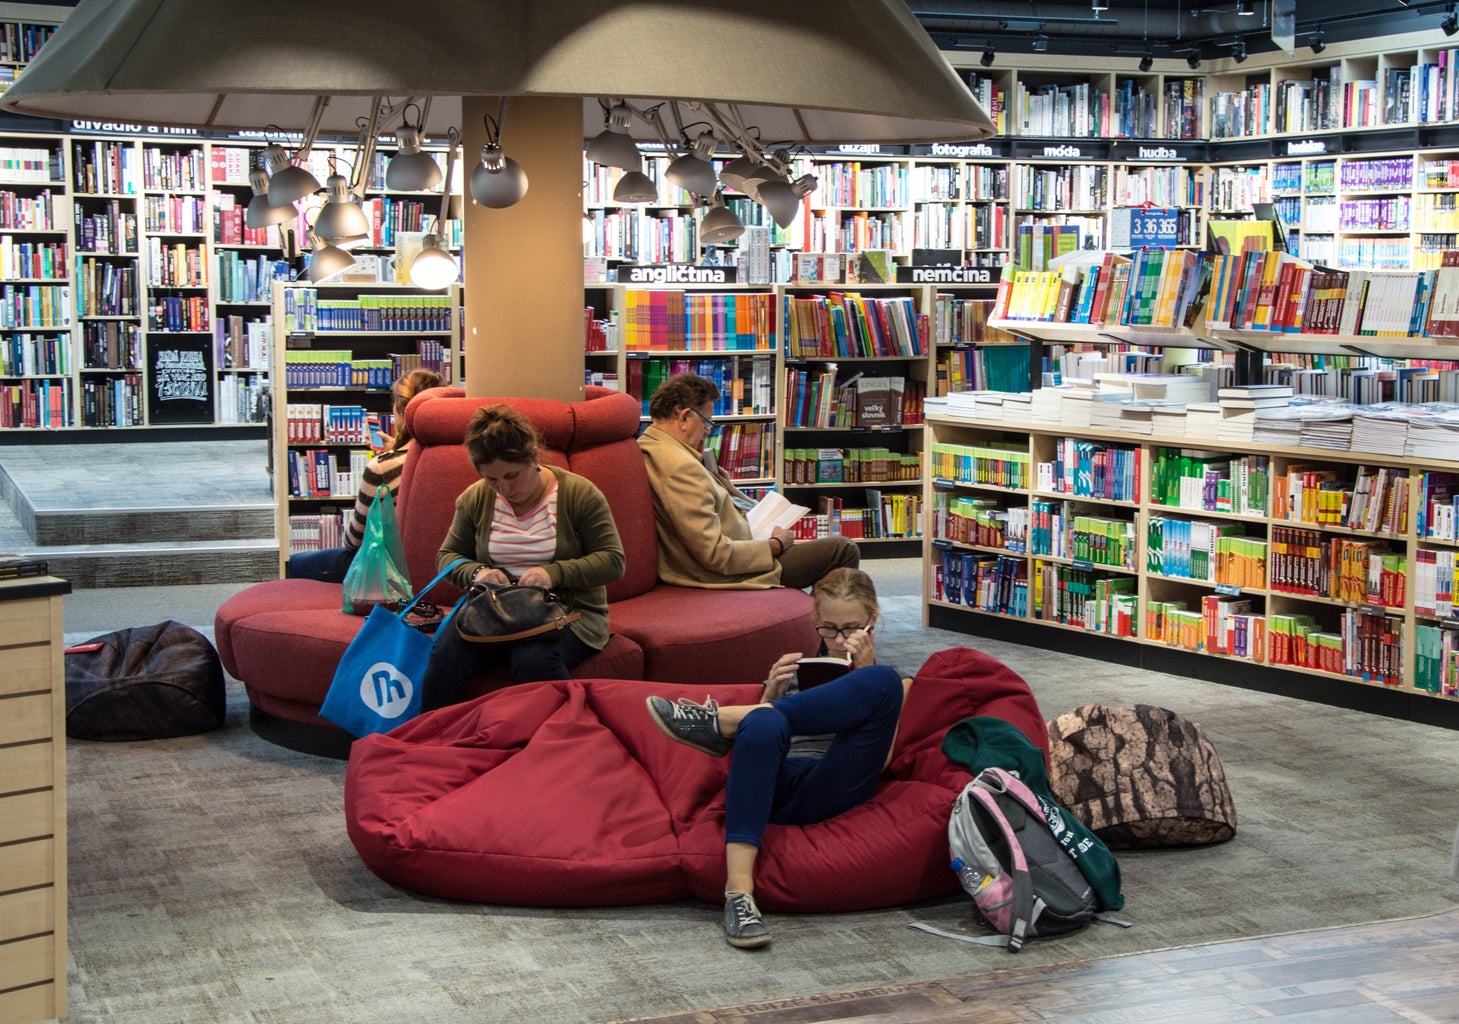 People sitting in a library, reading